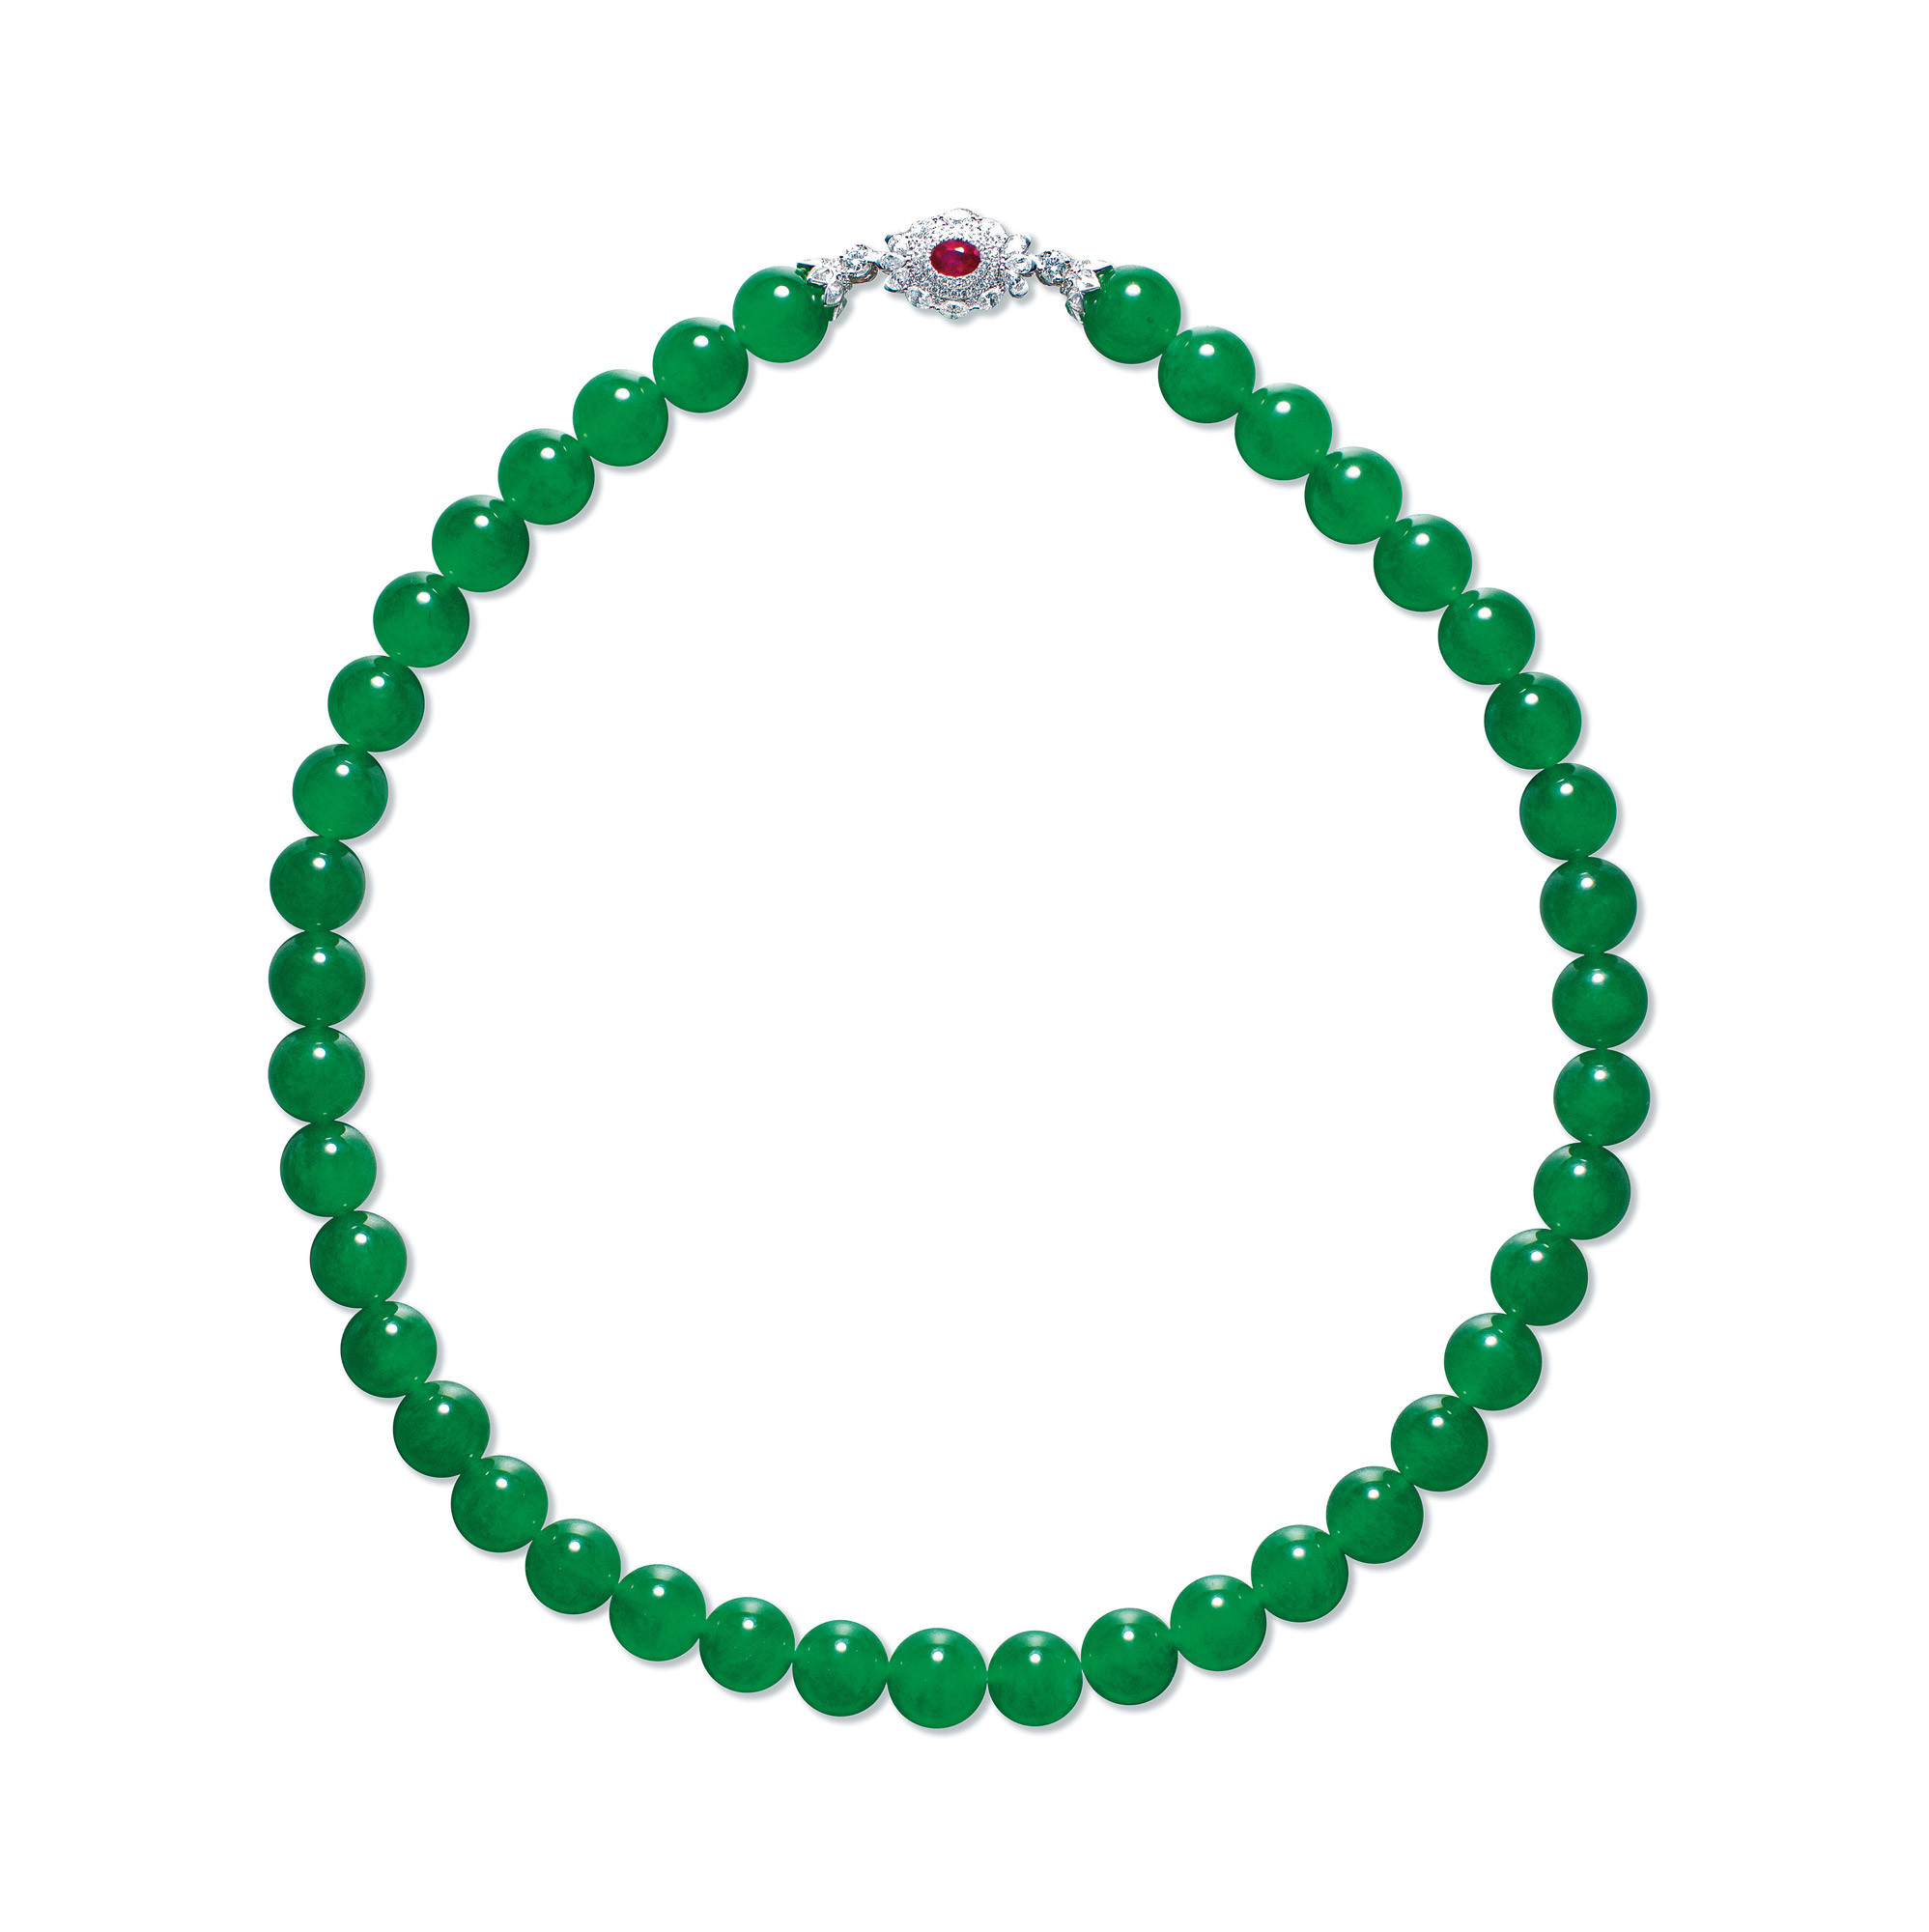 AN EXCEPTIONALLY FINE AND IMPORTANT JADEITE BEAD,DIAMOND AND RUBY NECKLACE